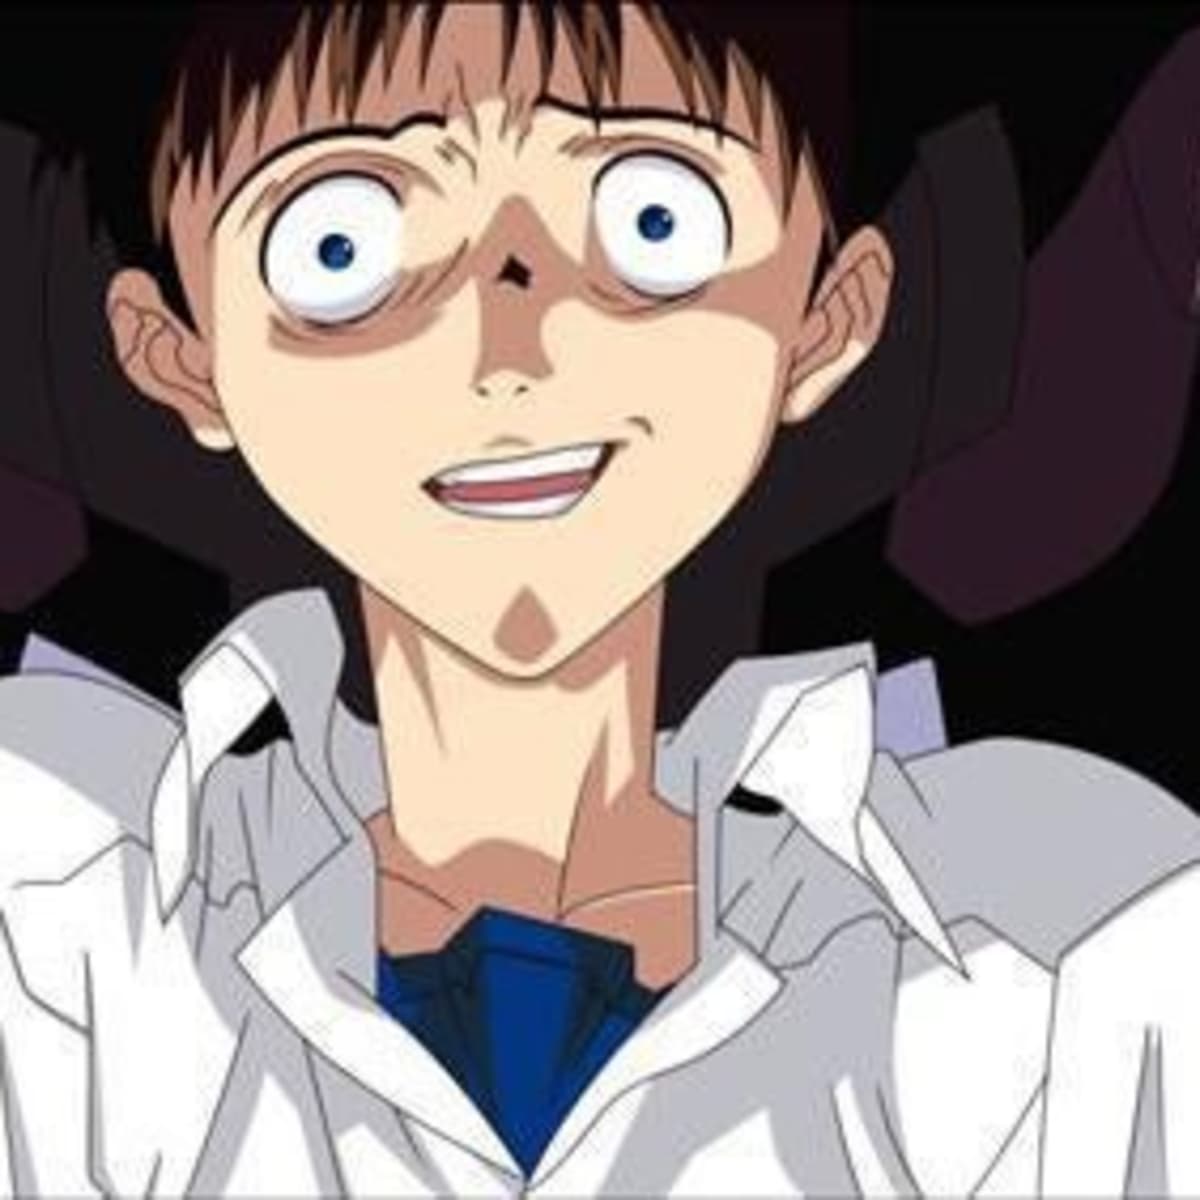 Is The End of Evangelion a Happy Ending? - HubPages